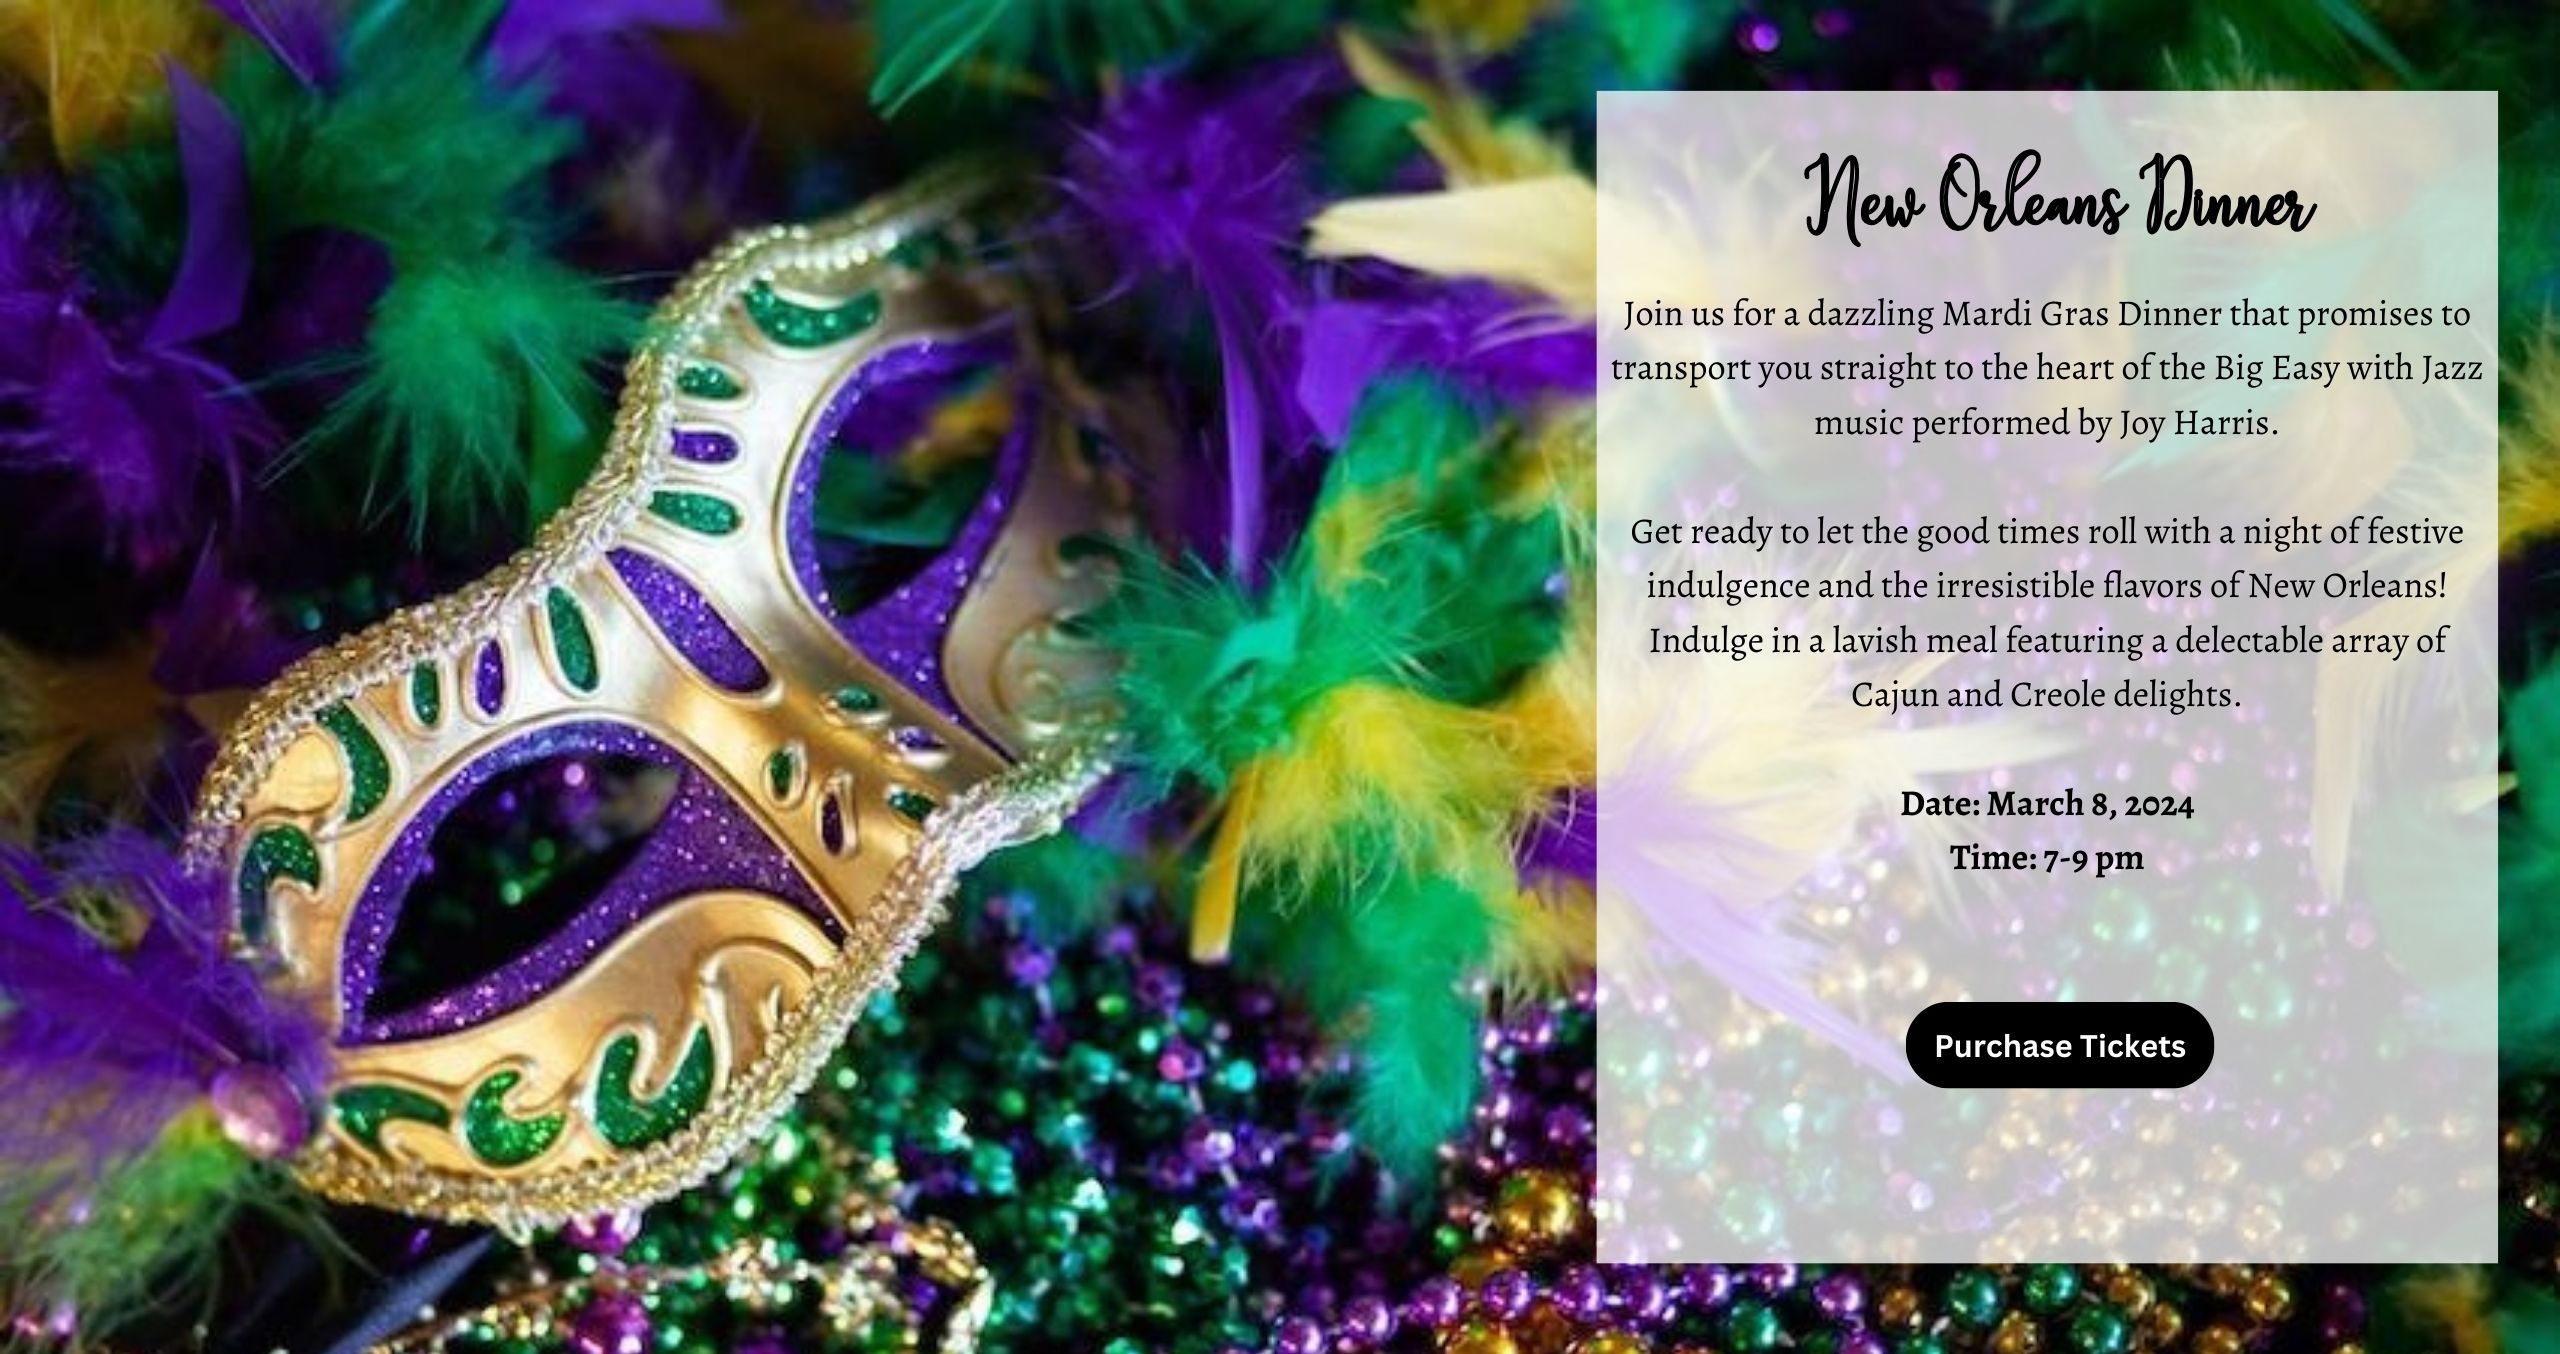 Join us for a dazzling Mardi Gras Dinner that promises to transport you straight to the heart of the Big Easy with Jazz music performed by Joy Harris. Get ready to let the good times roll with a night of festive indulgence and the irresistible flavors of New Orleans! Indulge in a lavish meal featuring a delectable array of Cajun and Creole delights. Date: March 8, 2024 Time: 7-9 pm